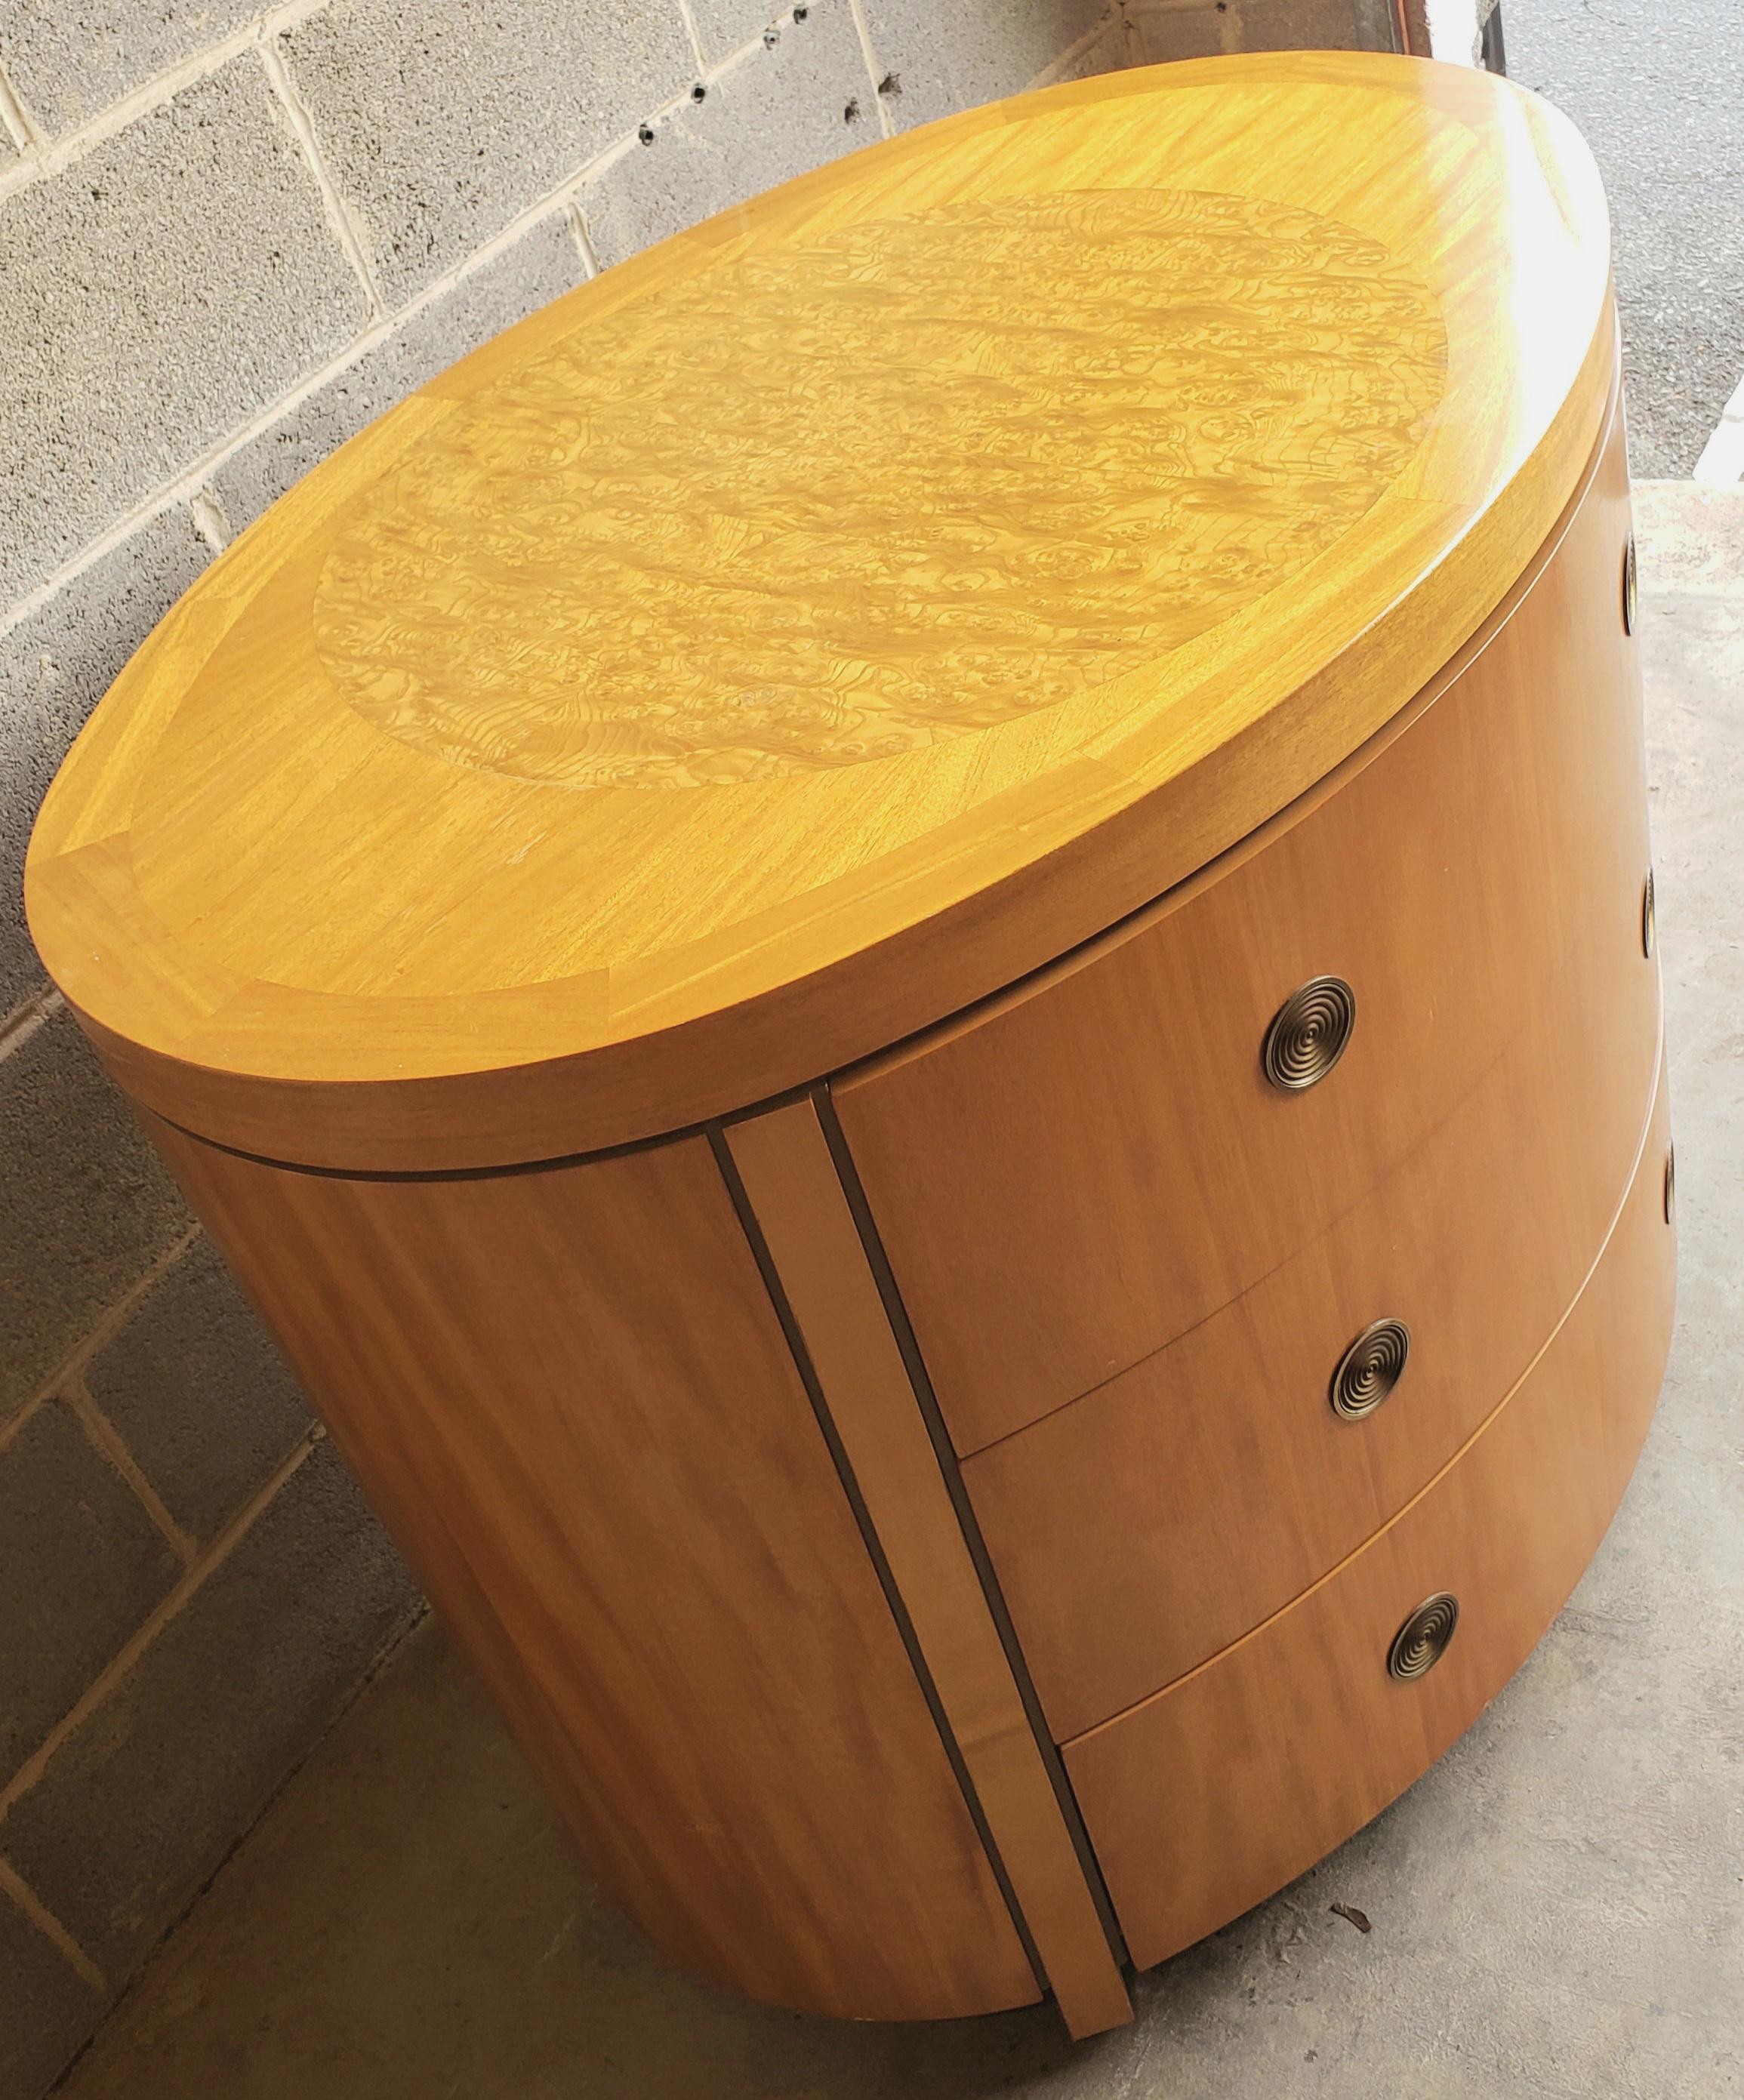 Charles Pfister for Baker prima vera mahogany three-drawer oval commode with satinwood banded and burl top.
Prima vera mahogany case and drawer fronts with flush concentric circled swiveling brass pulls. Four radius end legs and olive ash burled